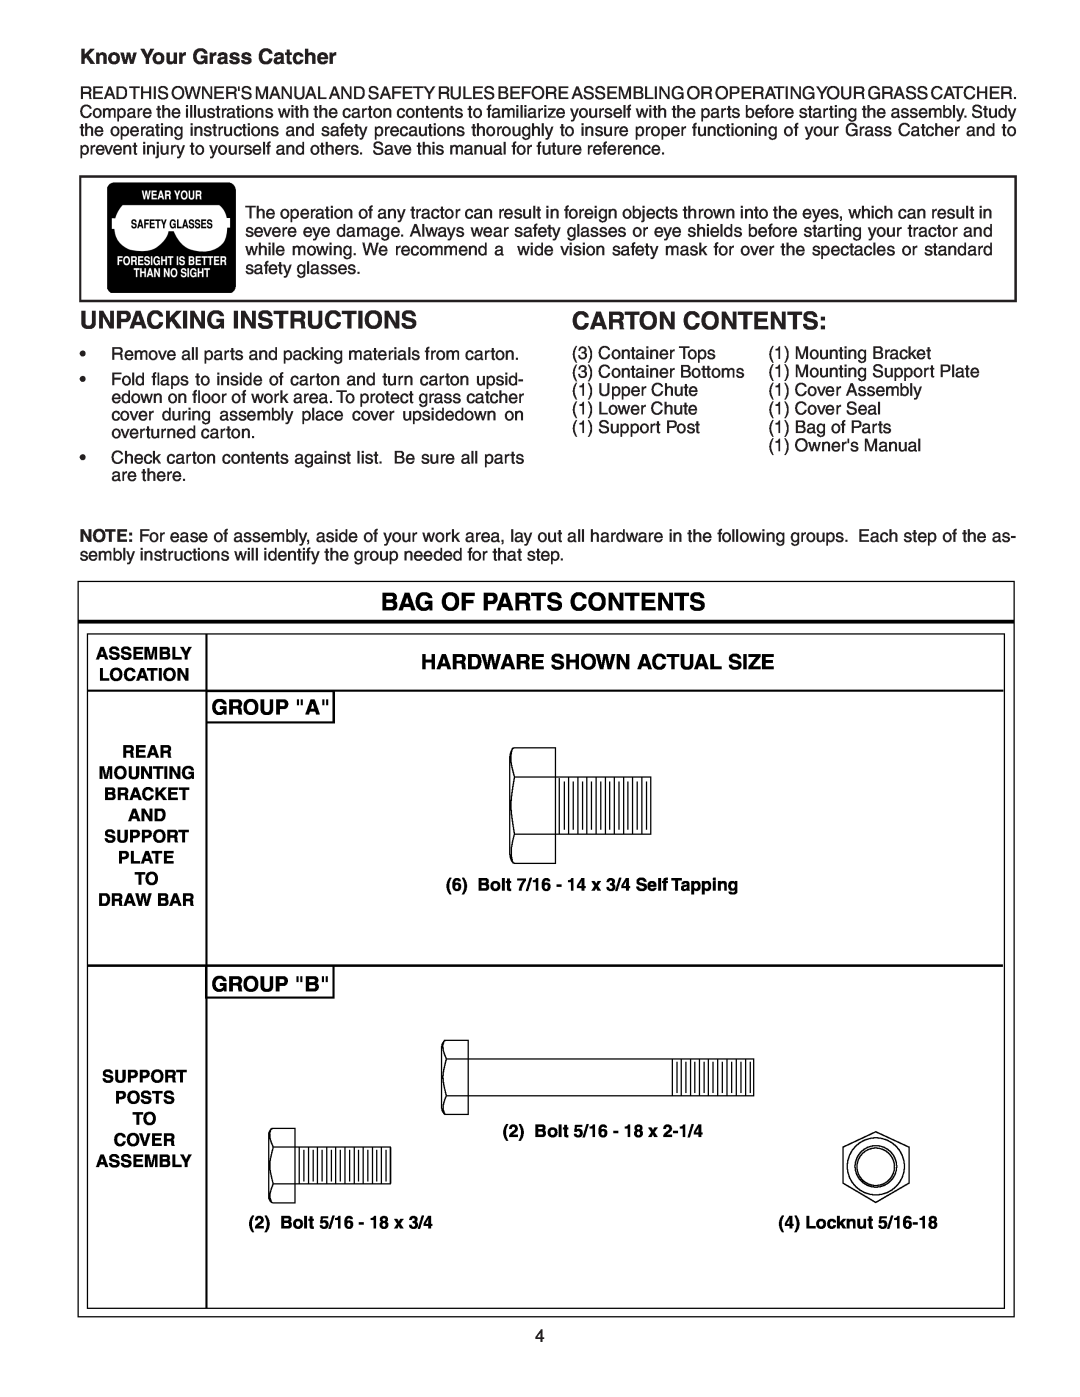 Poulan 964 04 06-07 Unpacking Instructions, Carton Contents, Bag Of Parts Contents, Know Your Grass Catcher, Group A 